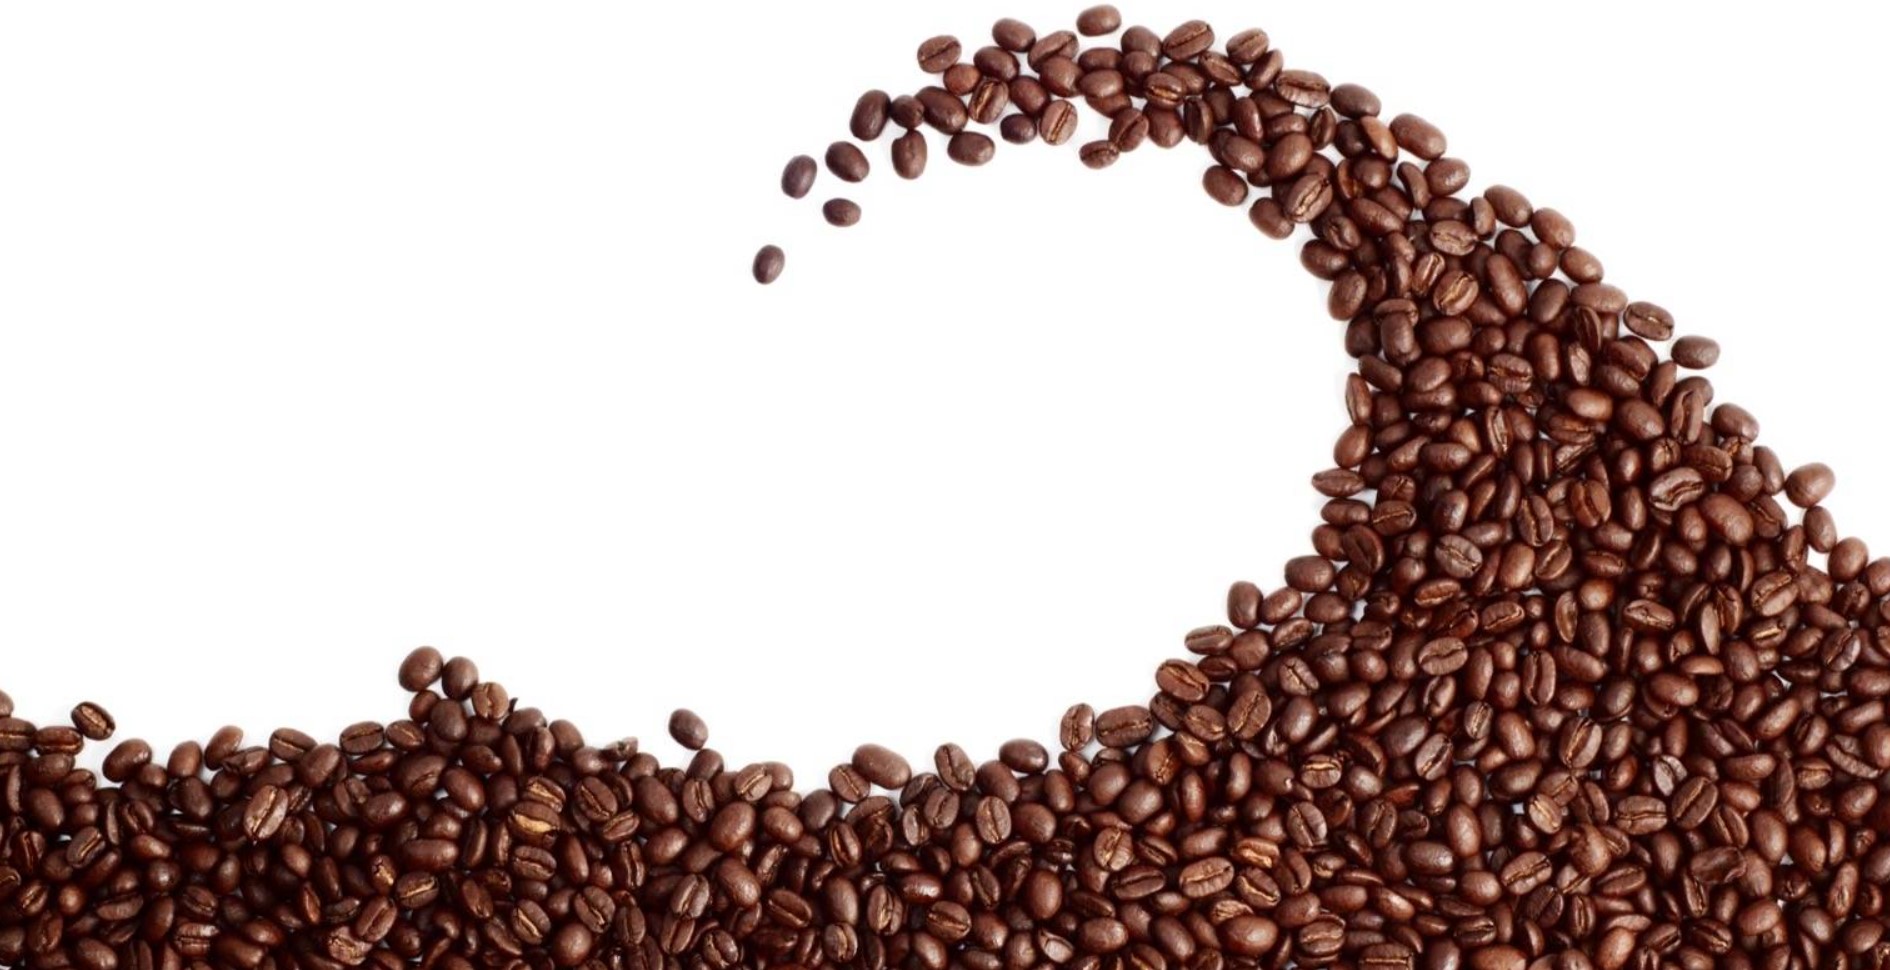 The Coffee Revolution: How Third-Wave Coffee Changed the Industry